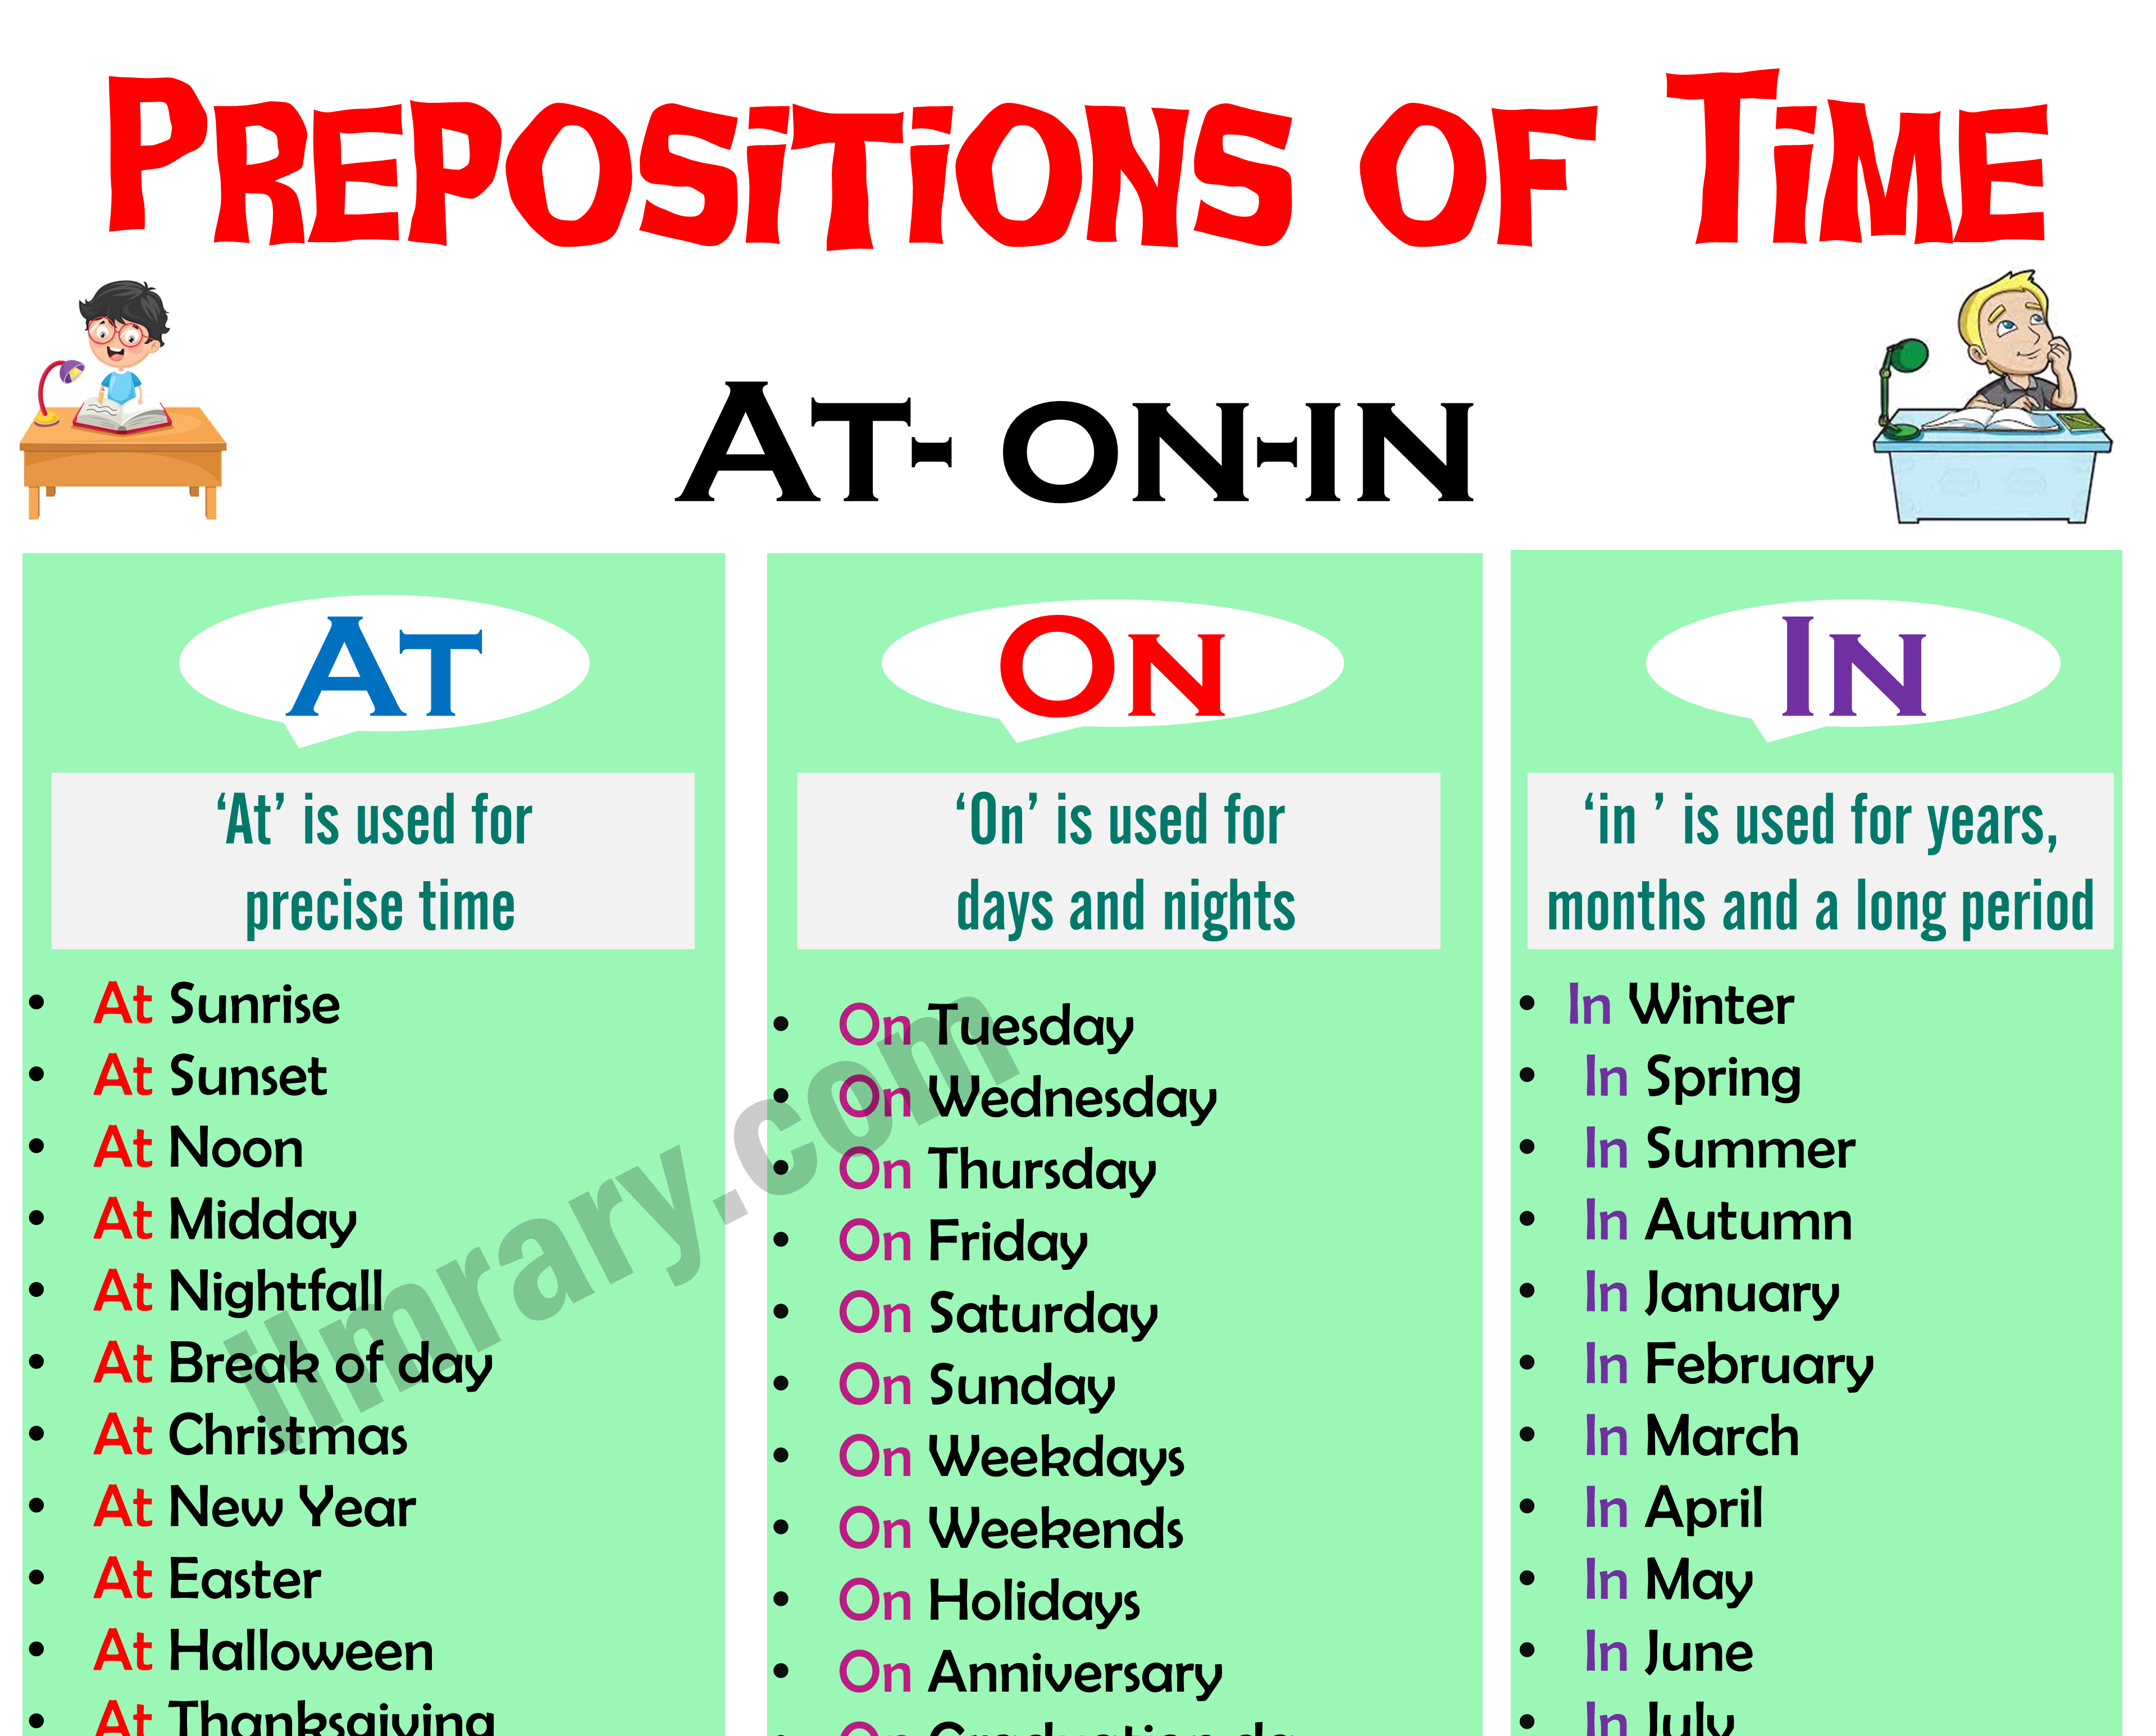 Preposition Definition | 100 Examples of Prepositions of time